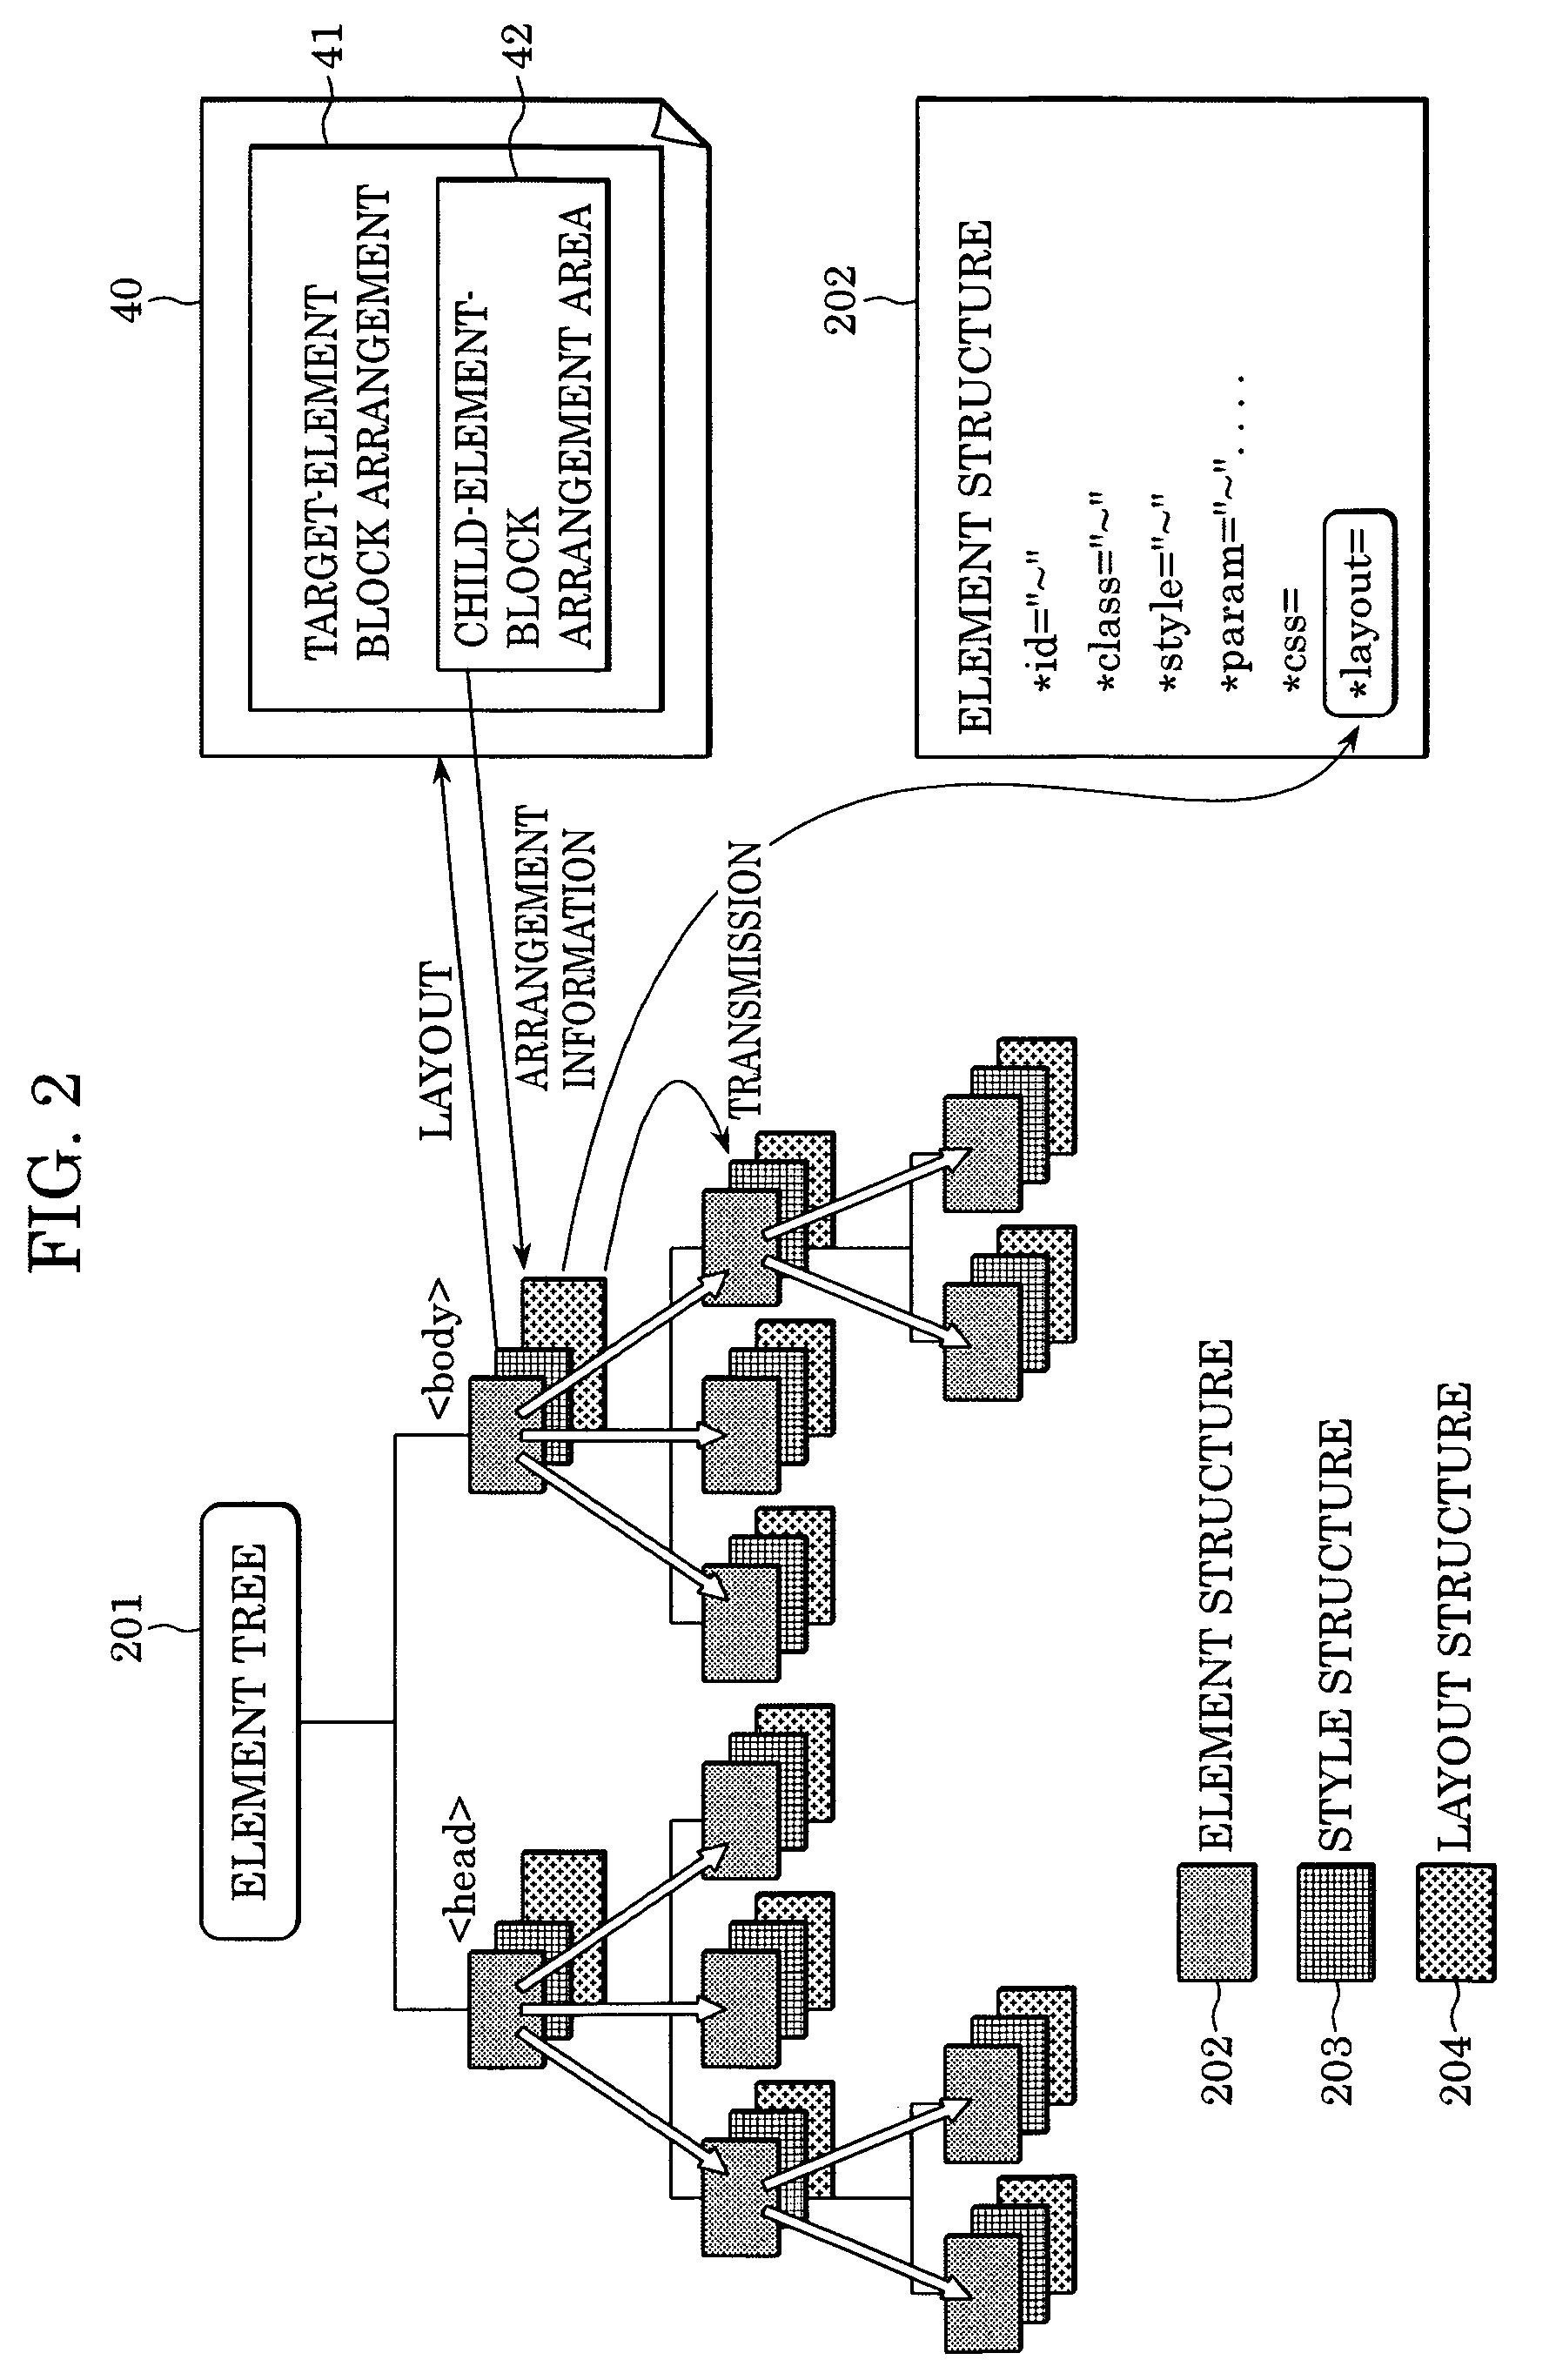 Image-forming device, image-forming method, computer program, and computer-readable recording medium